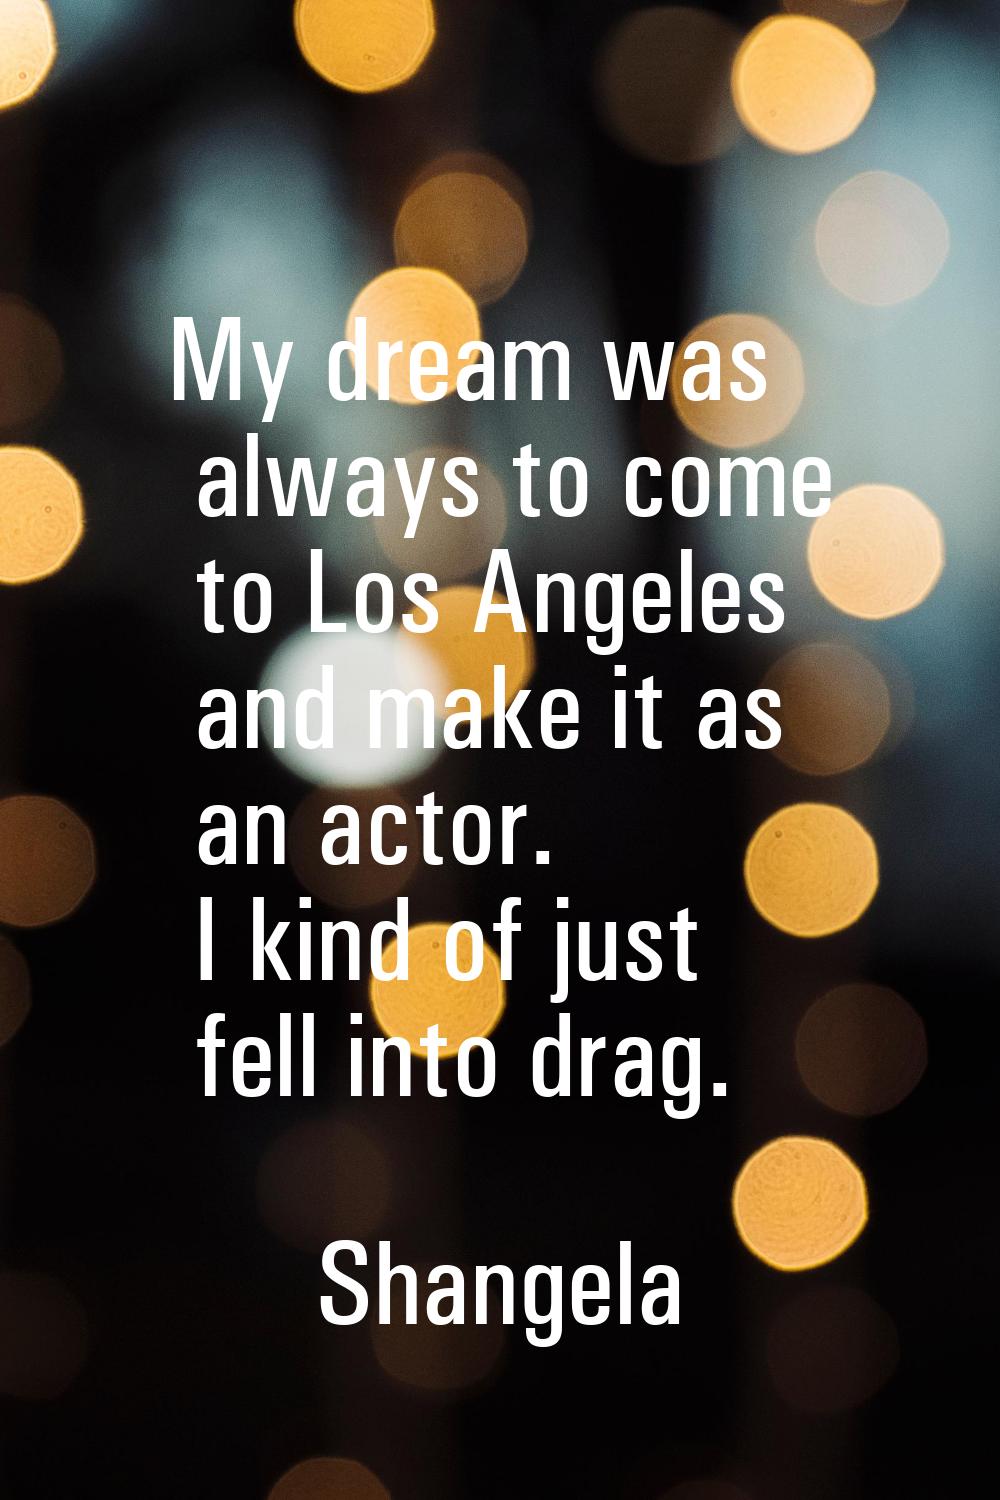 My dream was always to come to Los Angeles and make it as an actor. I kind of just fell into drag.